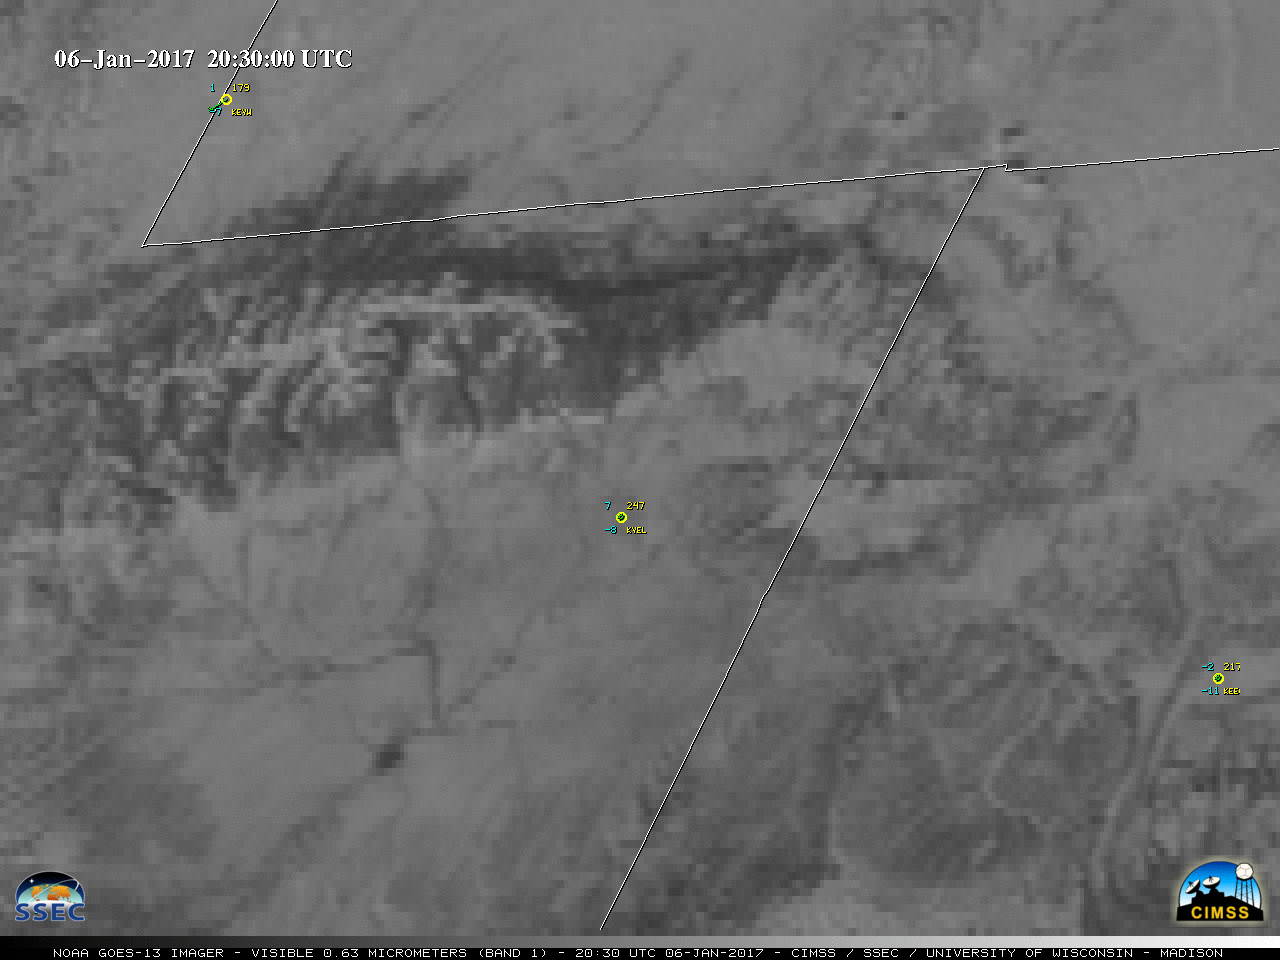 GOES-13 Visible (0.63 µm) images, with hourly surface reports [click to play animation]